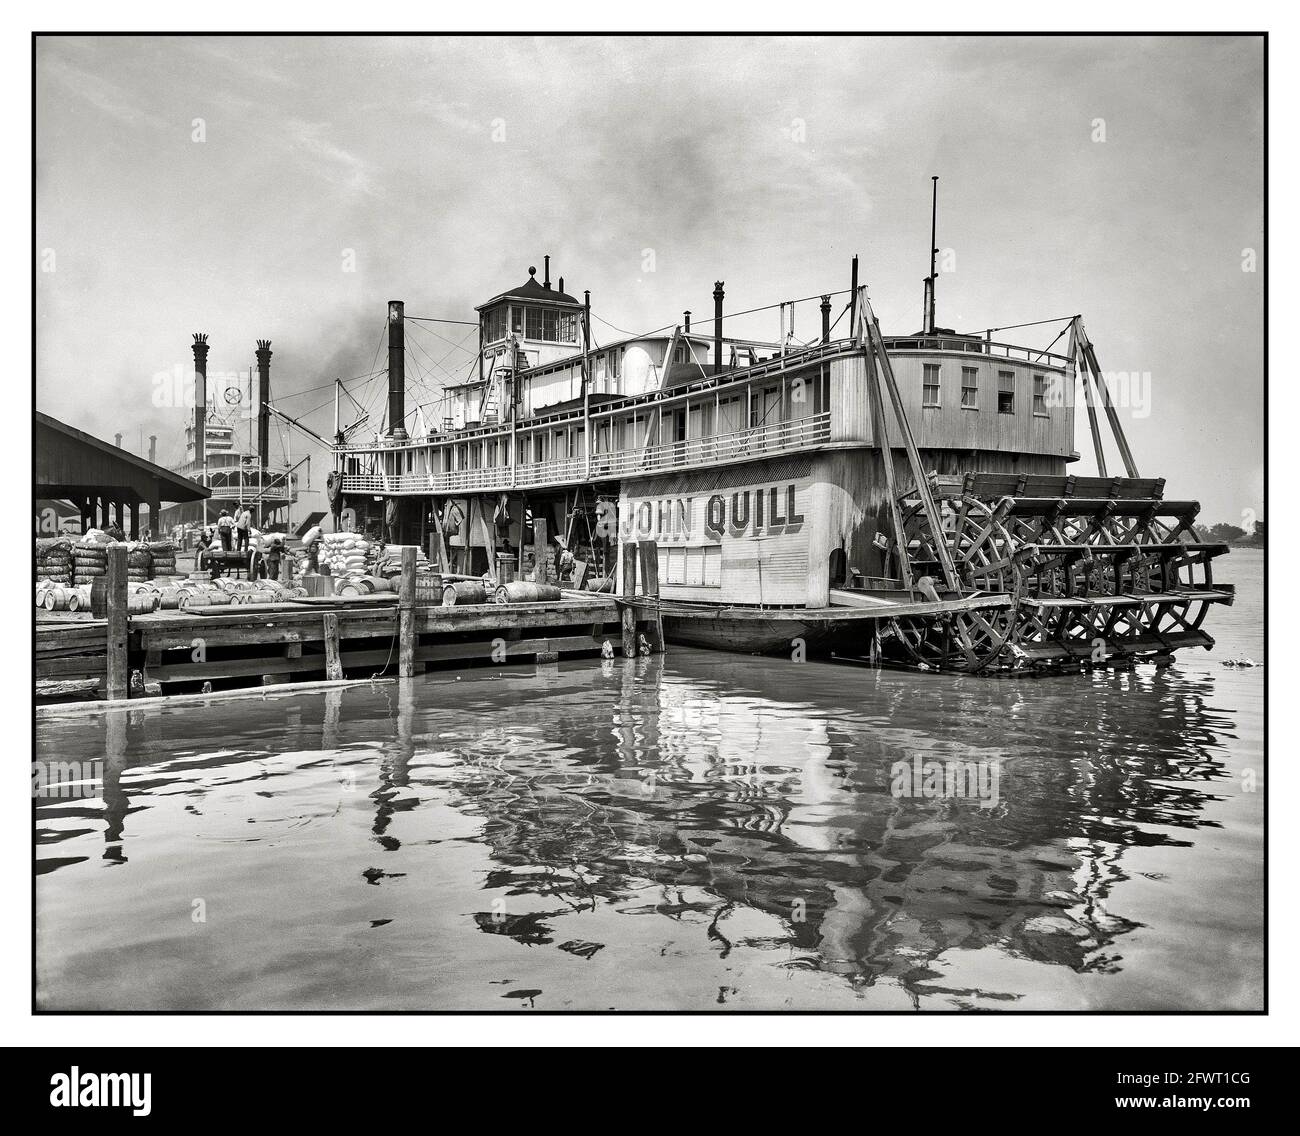 Packet Steamer Circa 1910. 'Sternwheeler John Quill, packet steamer.' She ran deliveries primarily the Tombigbee and Warrior Rivers in Alabama above Mobile, where this photograph was taken. Built by the famous Howard Shipyard at Jeffersonville, Indiana, for her namesake in 1907, she served that stretch of river until towed to Twelve Mile Island on the Mobile River (just northeast of Mobile) and dismantled there in 1928.   Launched: 1907, Jeffersonville, Ind. by Howard Yard Destroyed: 1928, Feb., towed from Mobil to Twelve Mile Island Stock Photo